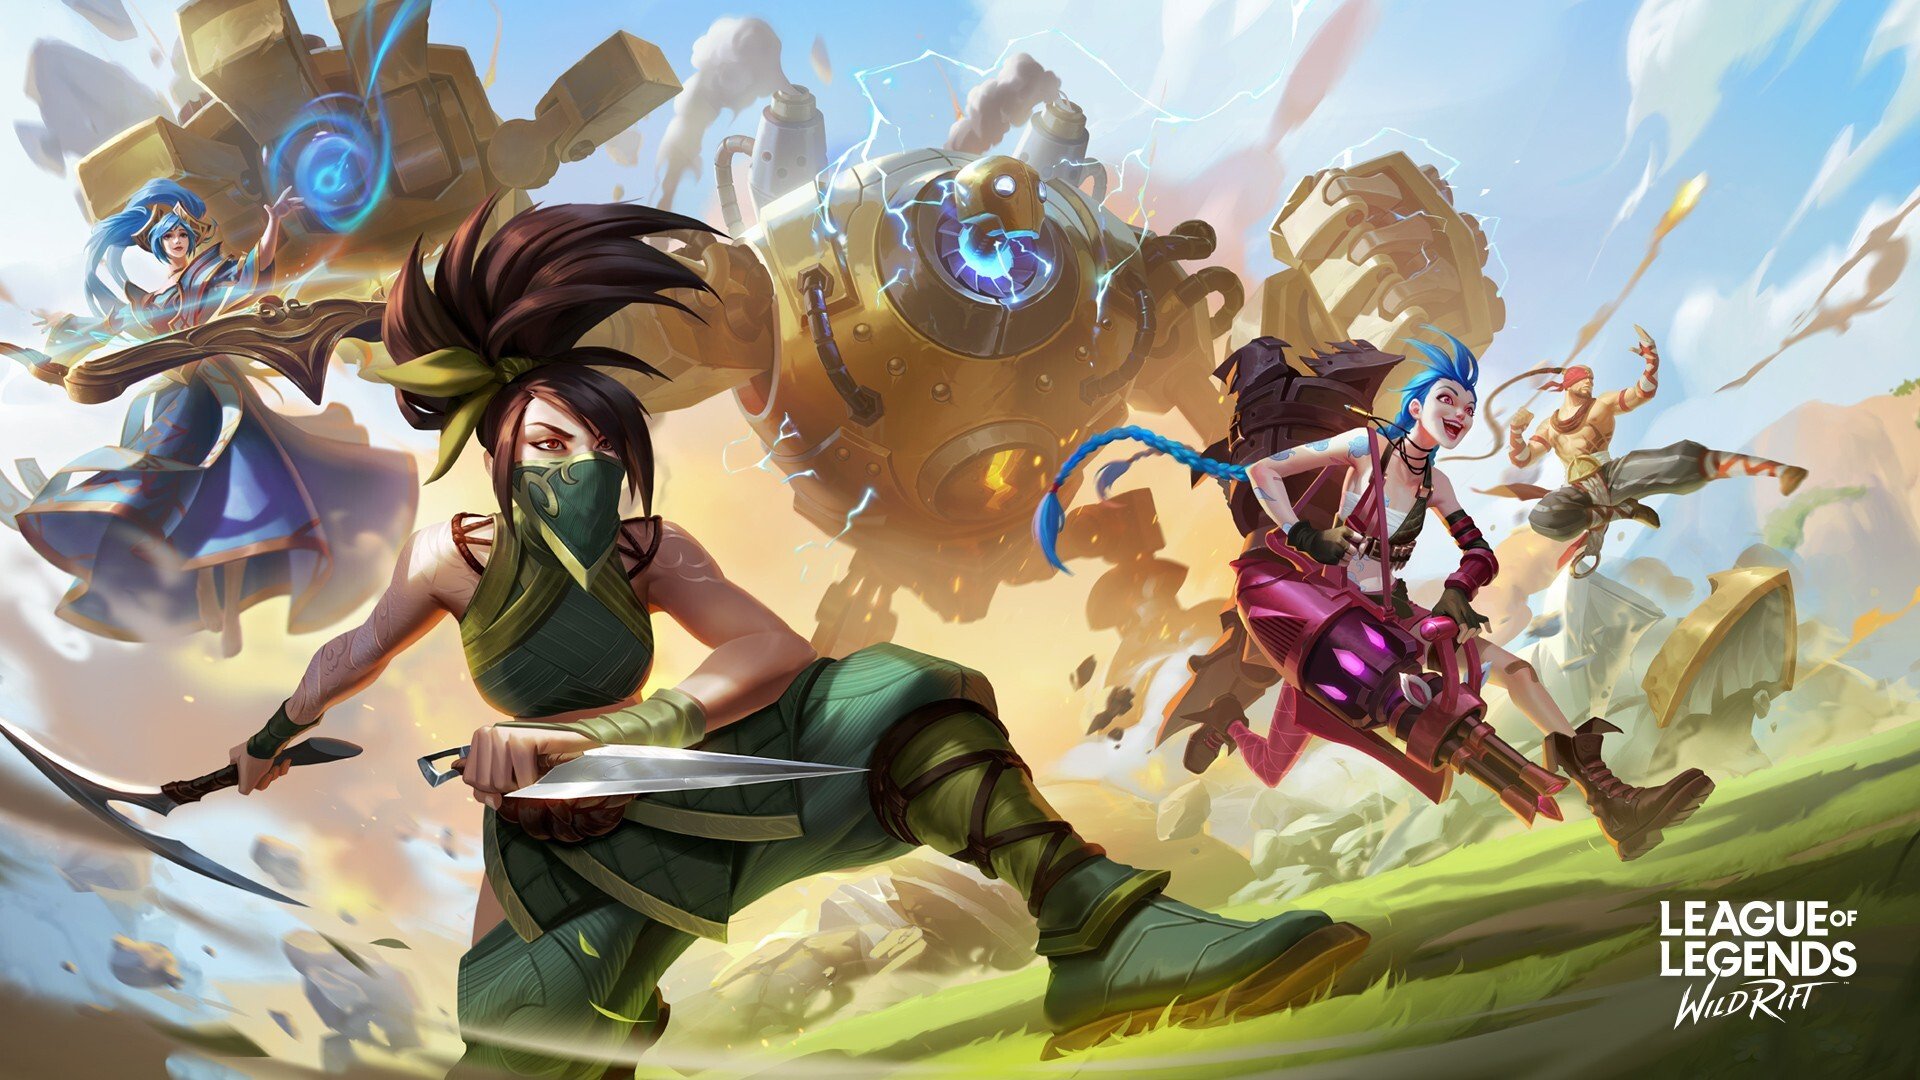 League of Legends: Wild Rift, one of the most highly anticipated games of 2020, gets a beta release in Asia. Photo: Riot Games